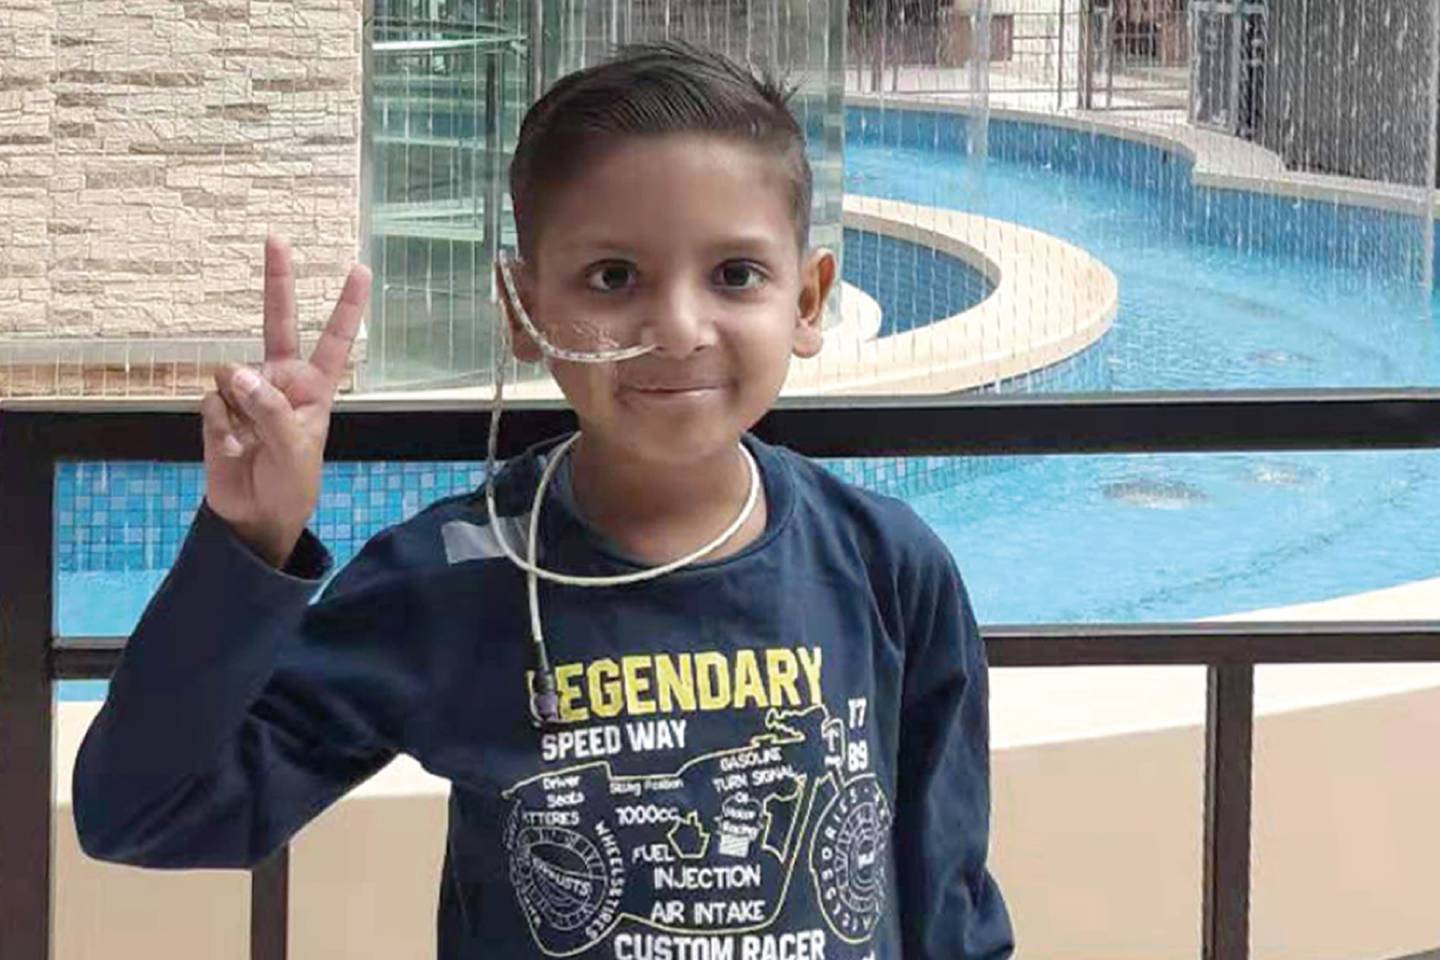 Vineet continued to attend school classes with his peers while undergoing treatment for the disease. 